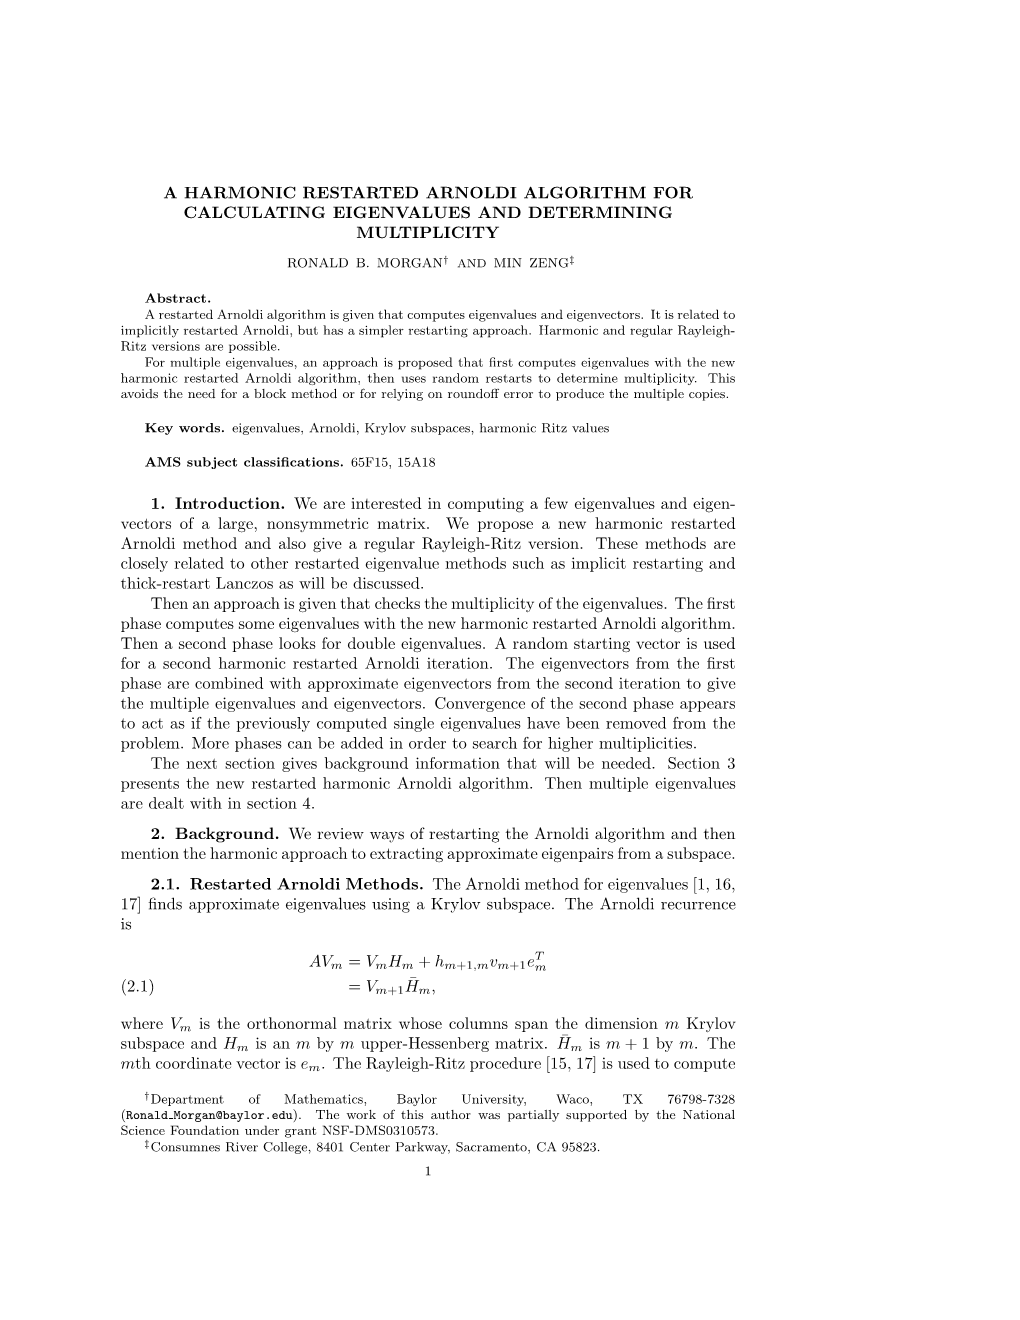 A Harmonic Restarted Arnoldi Algorithm for Calculating Eigenvalues and Determining Multiplicity